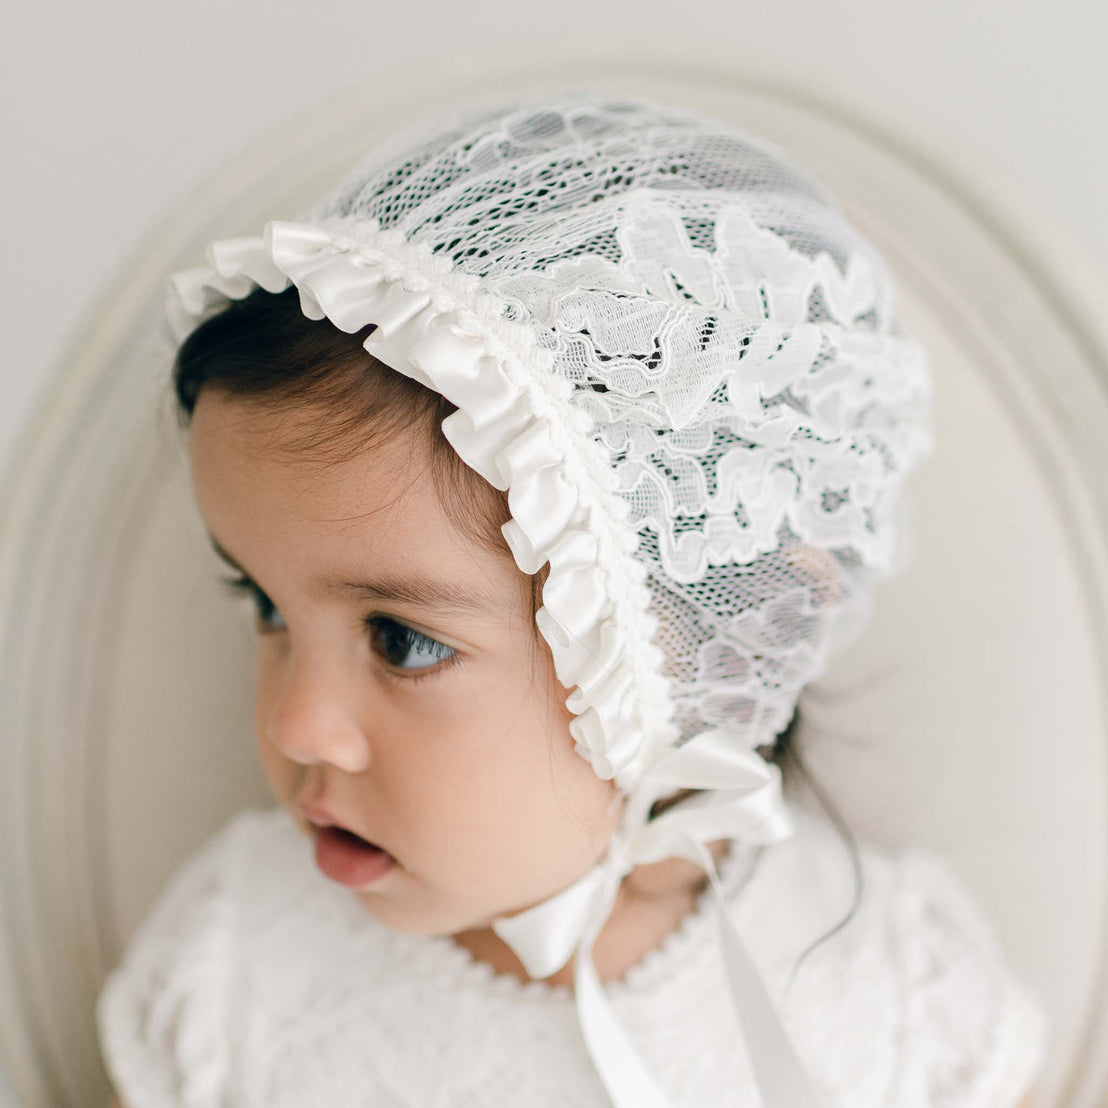 Baby girl wearing a lace baptism bonnet - part of the Victoria Christening Collection.